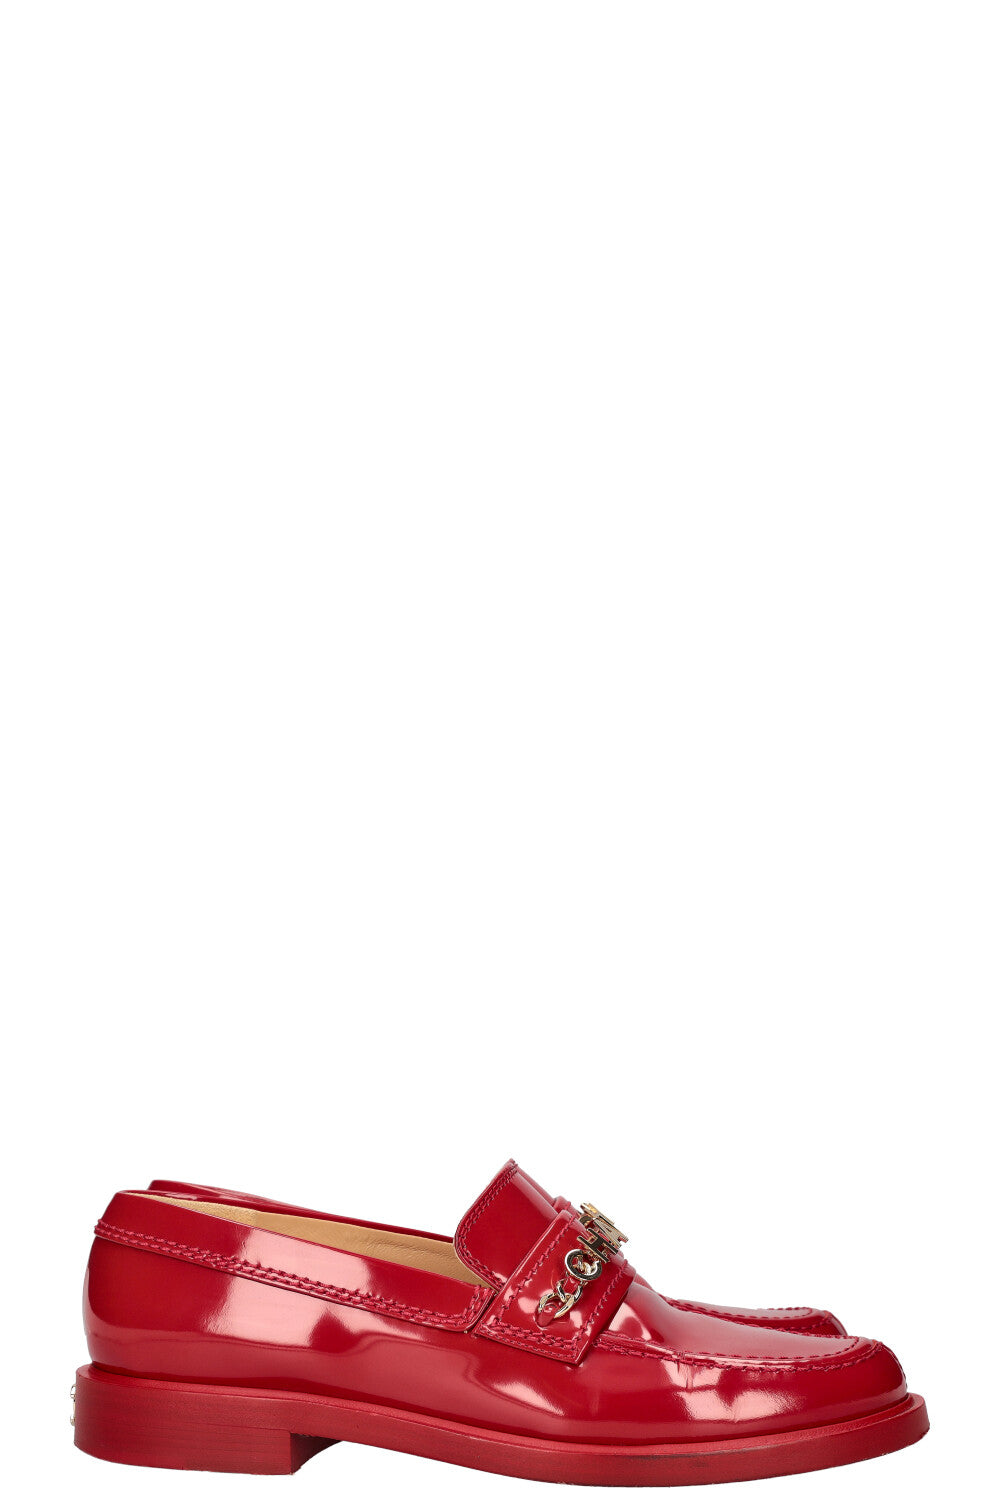 CHANEL Logo Loafers Red Patent